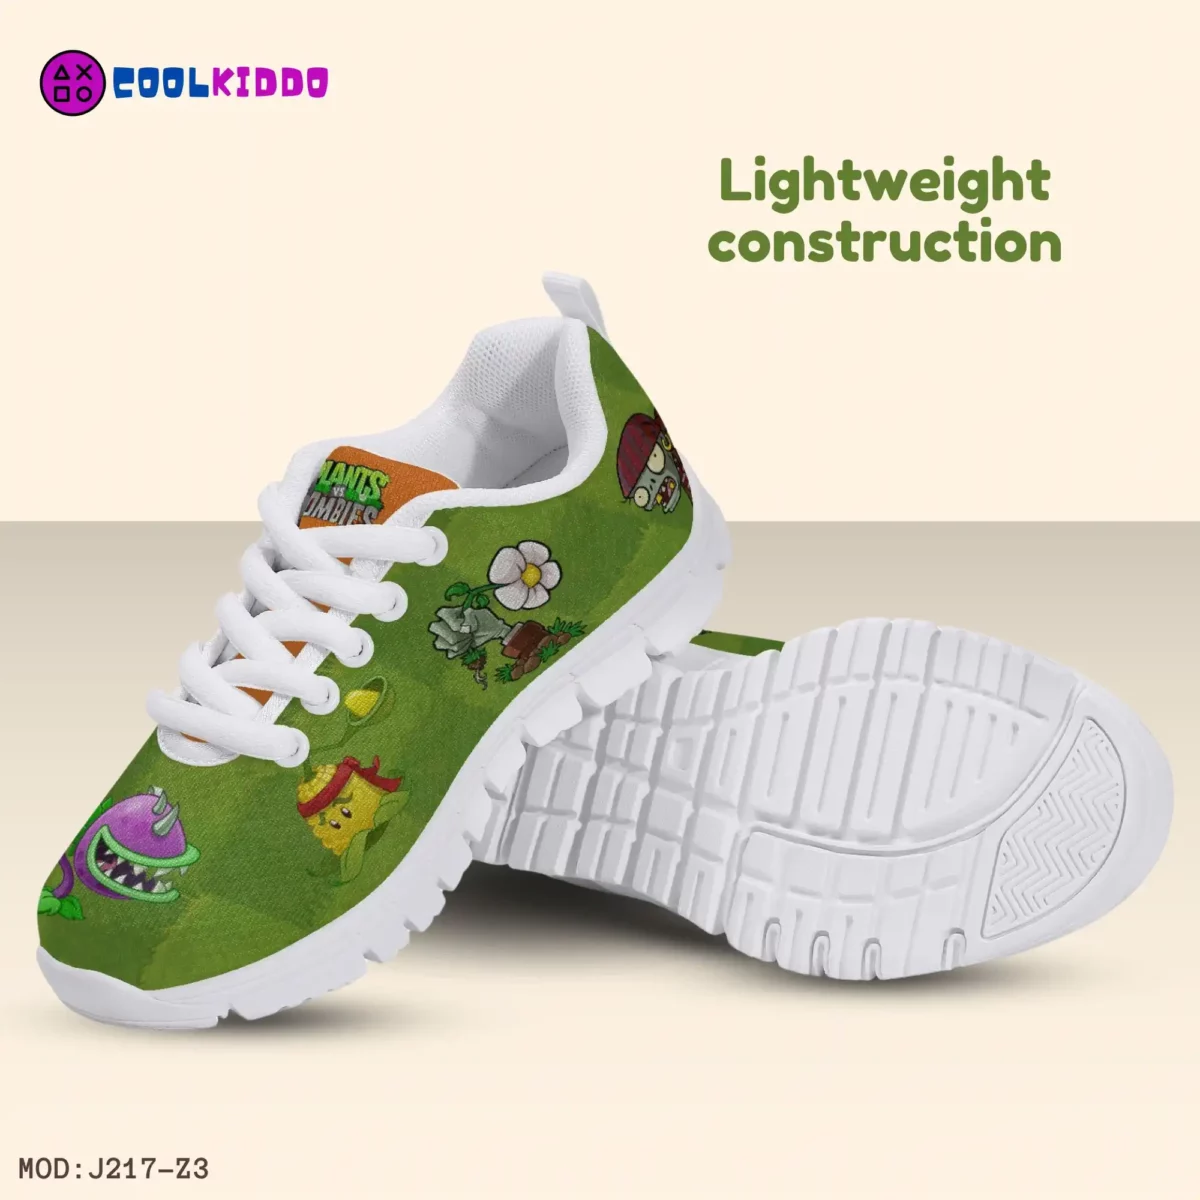 Personalized Plants vs Zombies Video Game Inspired Athletic Shoes for Kids/Youth Lightweight Mesh Sneakers Cool Kiddo 20